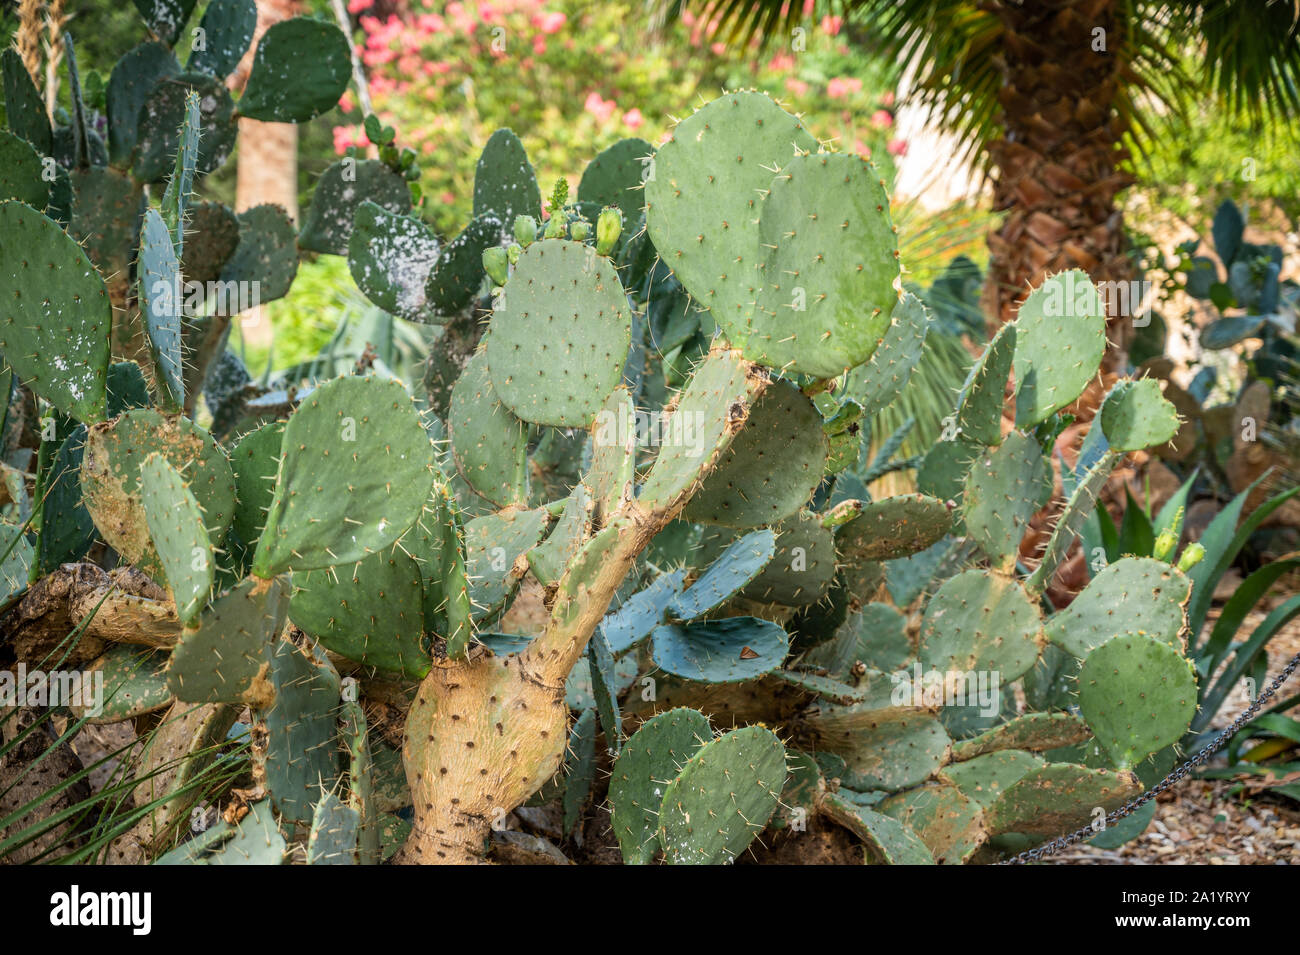 Large numbers of Cacti growing in the hot climate, San Antonio, Texas. Stock Photo